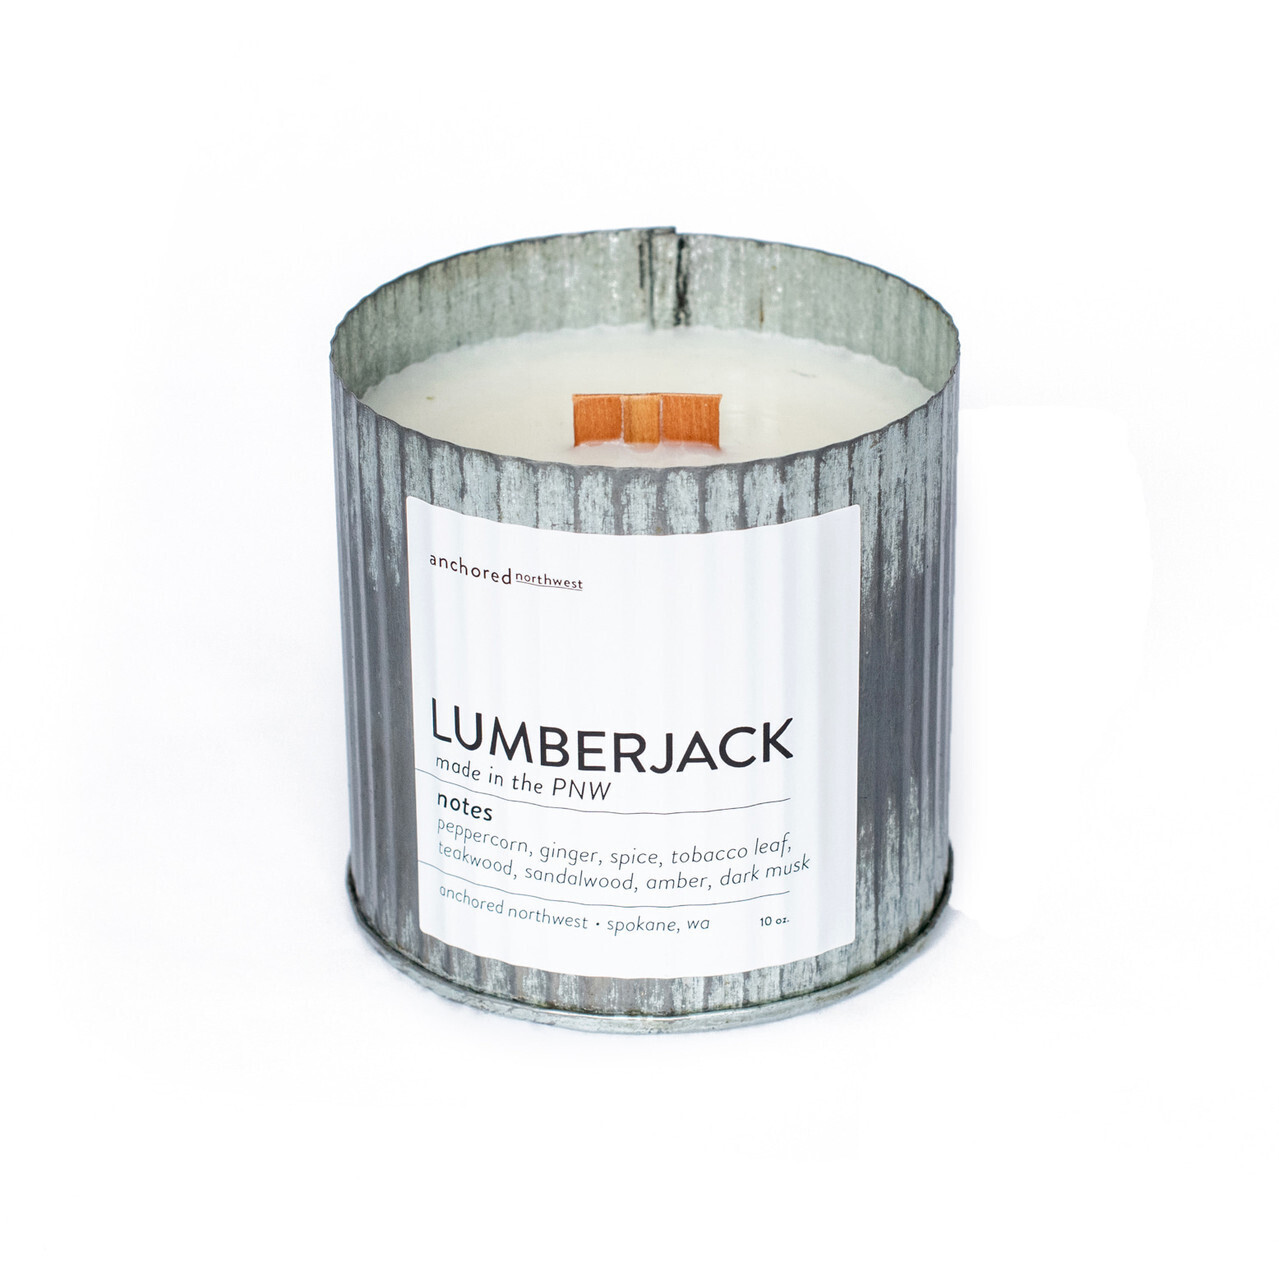 Lumberjack Rustic Vintage Candle by Anchored Northwest